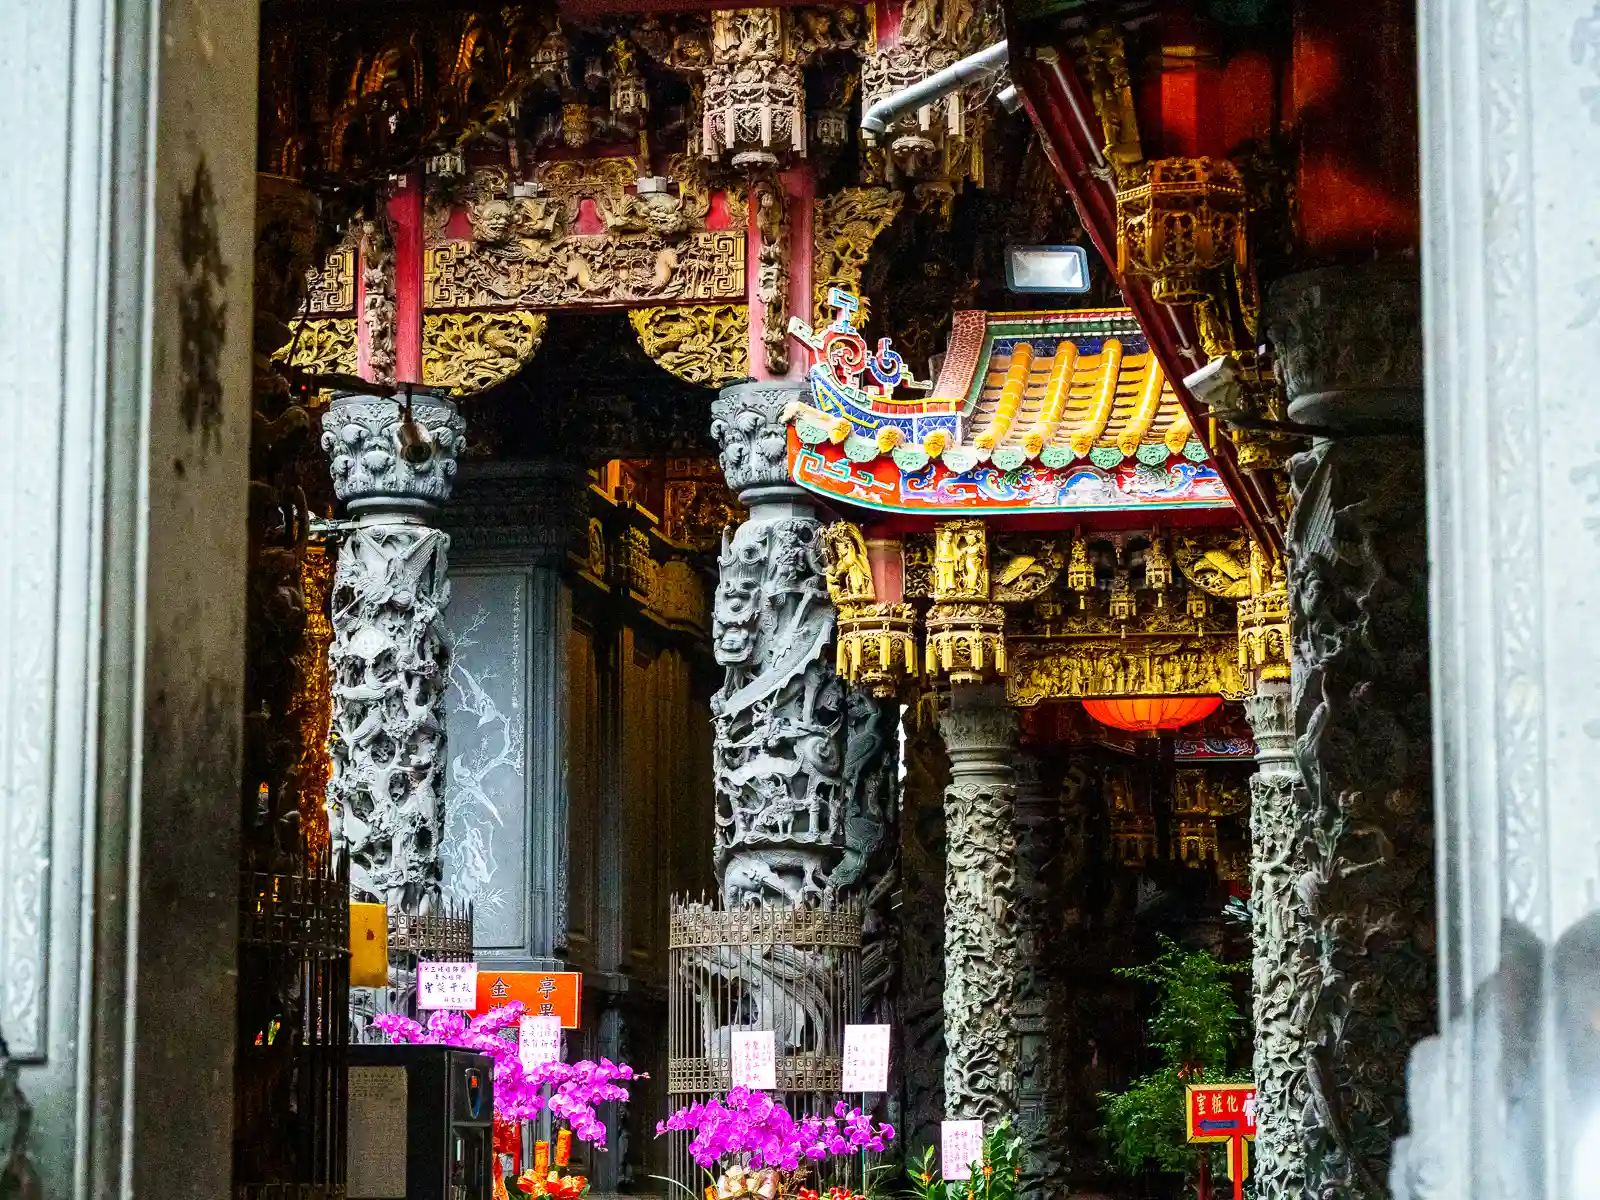 Multiple rows of carved columns, carved awnings, and roof carvings are seen in this shot of the interior of the temple.